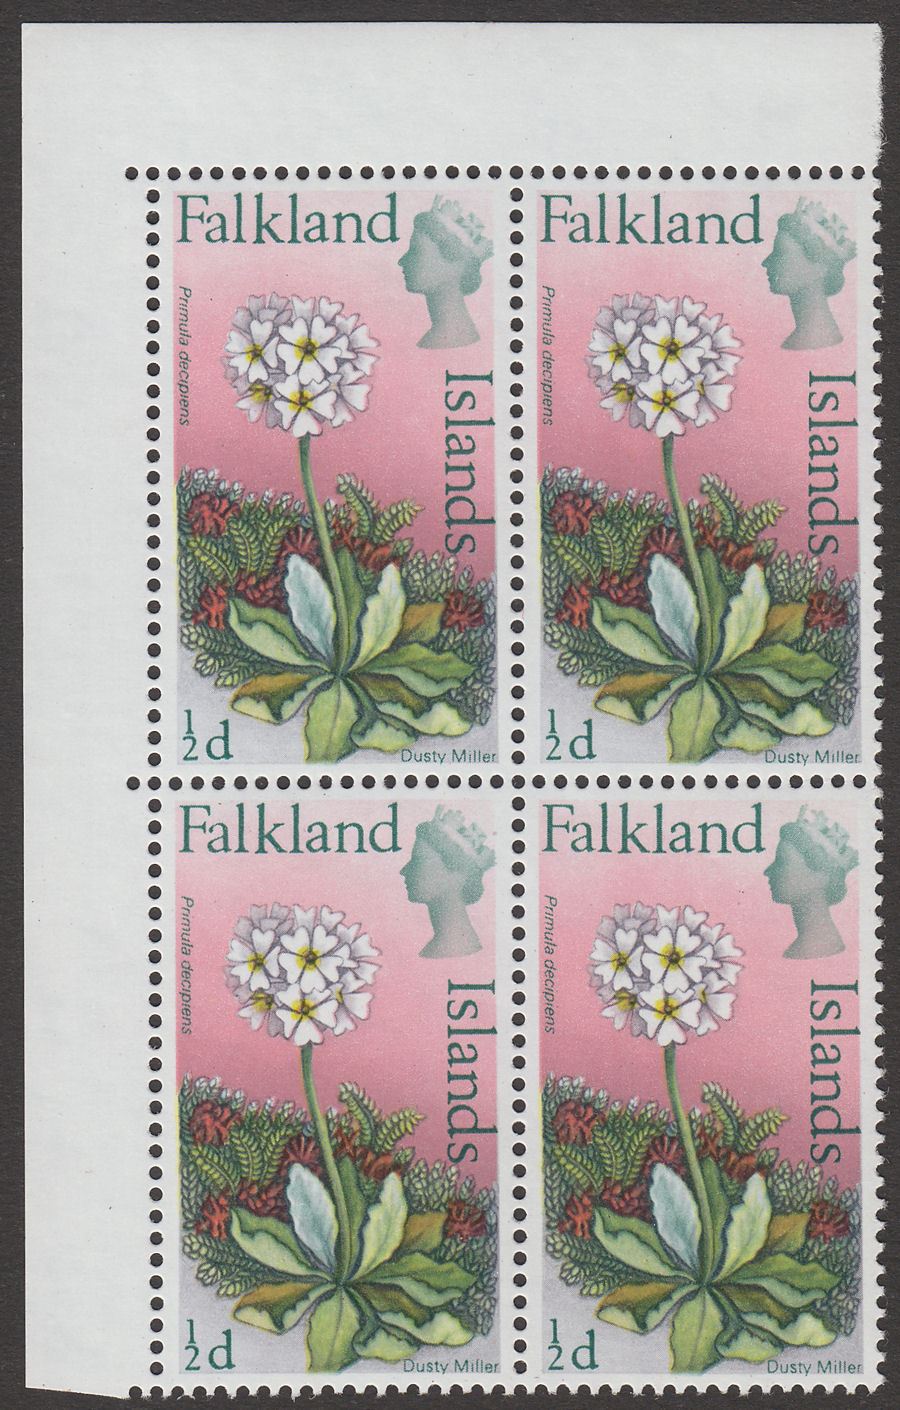 Falkland Islands 1968 QEII ½d Block of 4 Mint with Crown Flaw SG232-232a